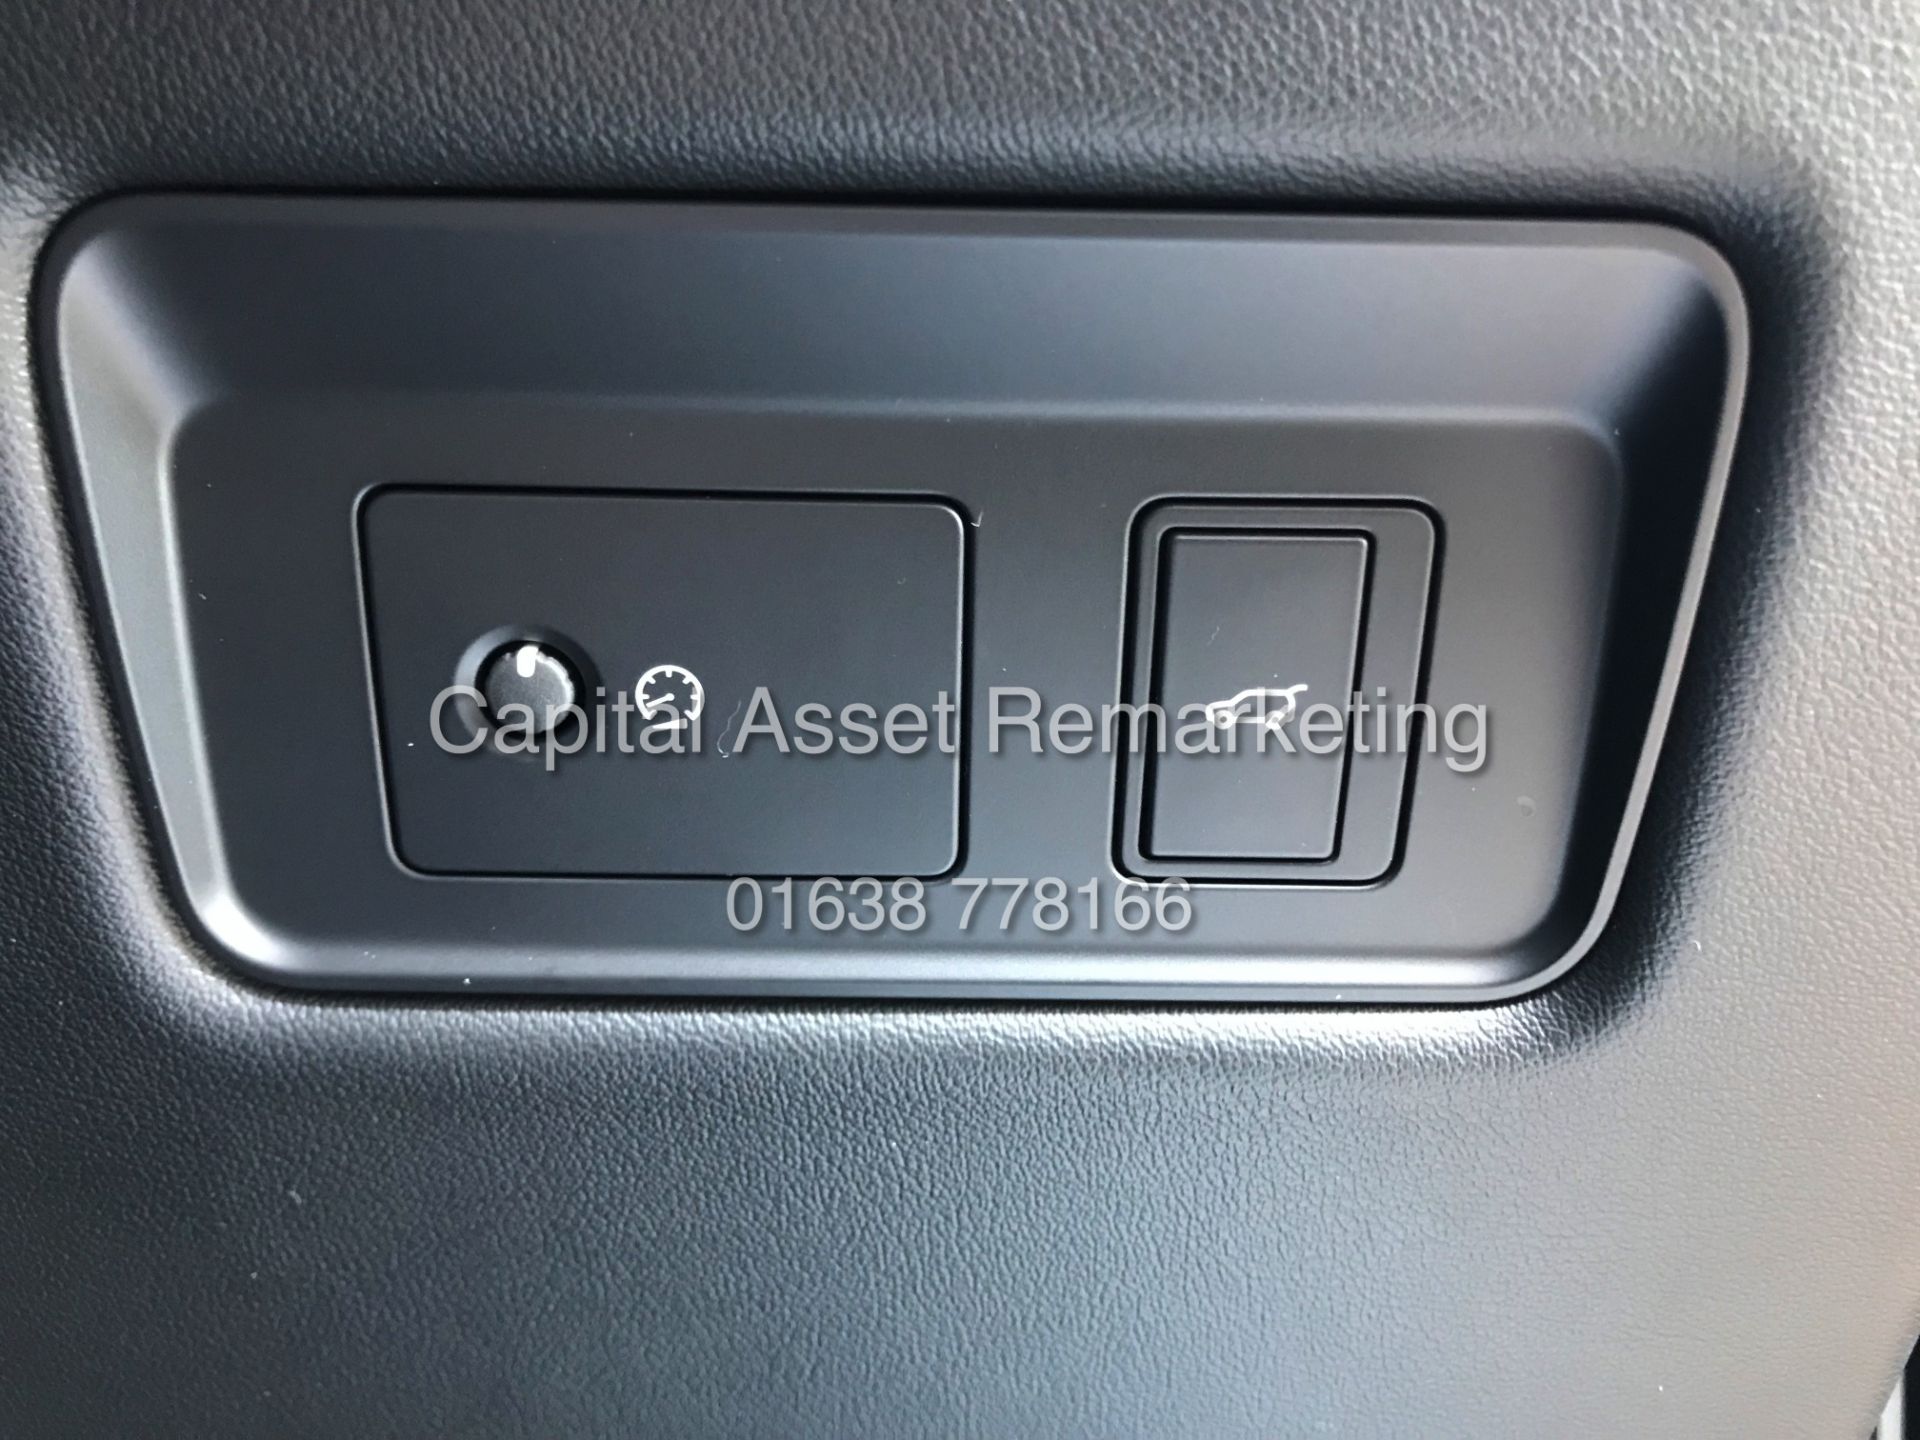 On Sale RANGE ROVER SPORT "HSE" 3.0 SDV6 AUTO (2019) FULLY LOADED - SAT NAV - PAN ROOF- FULL LEATHER - Image 29 of 35